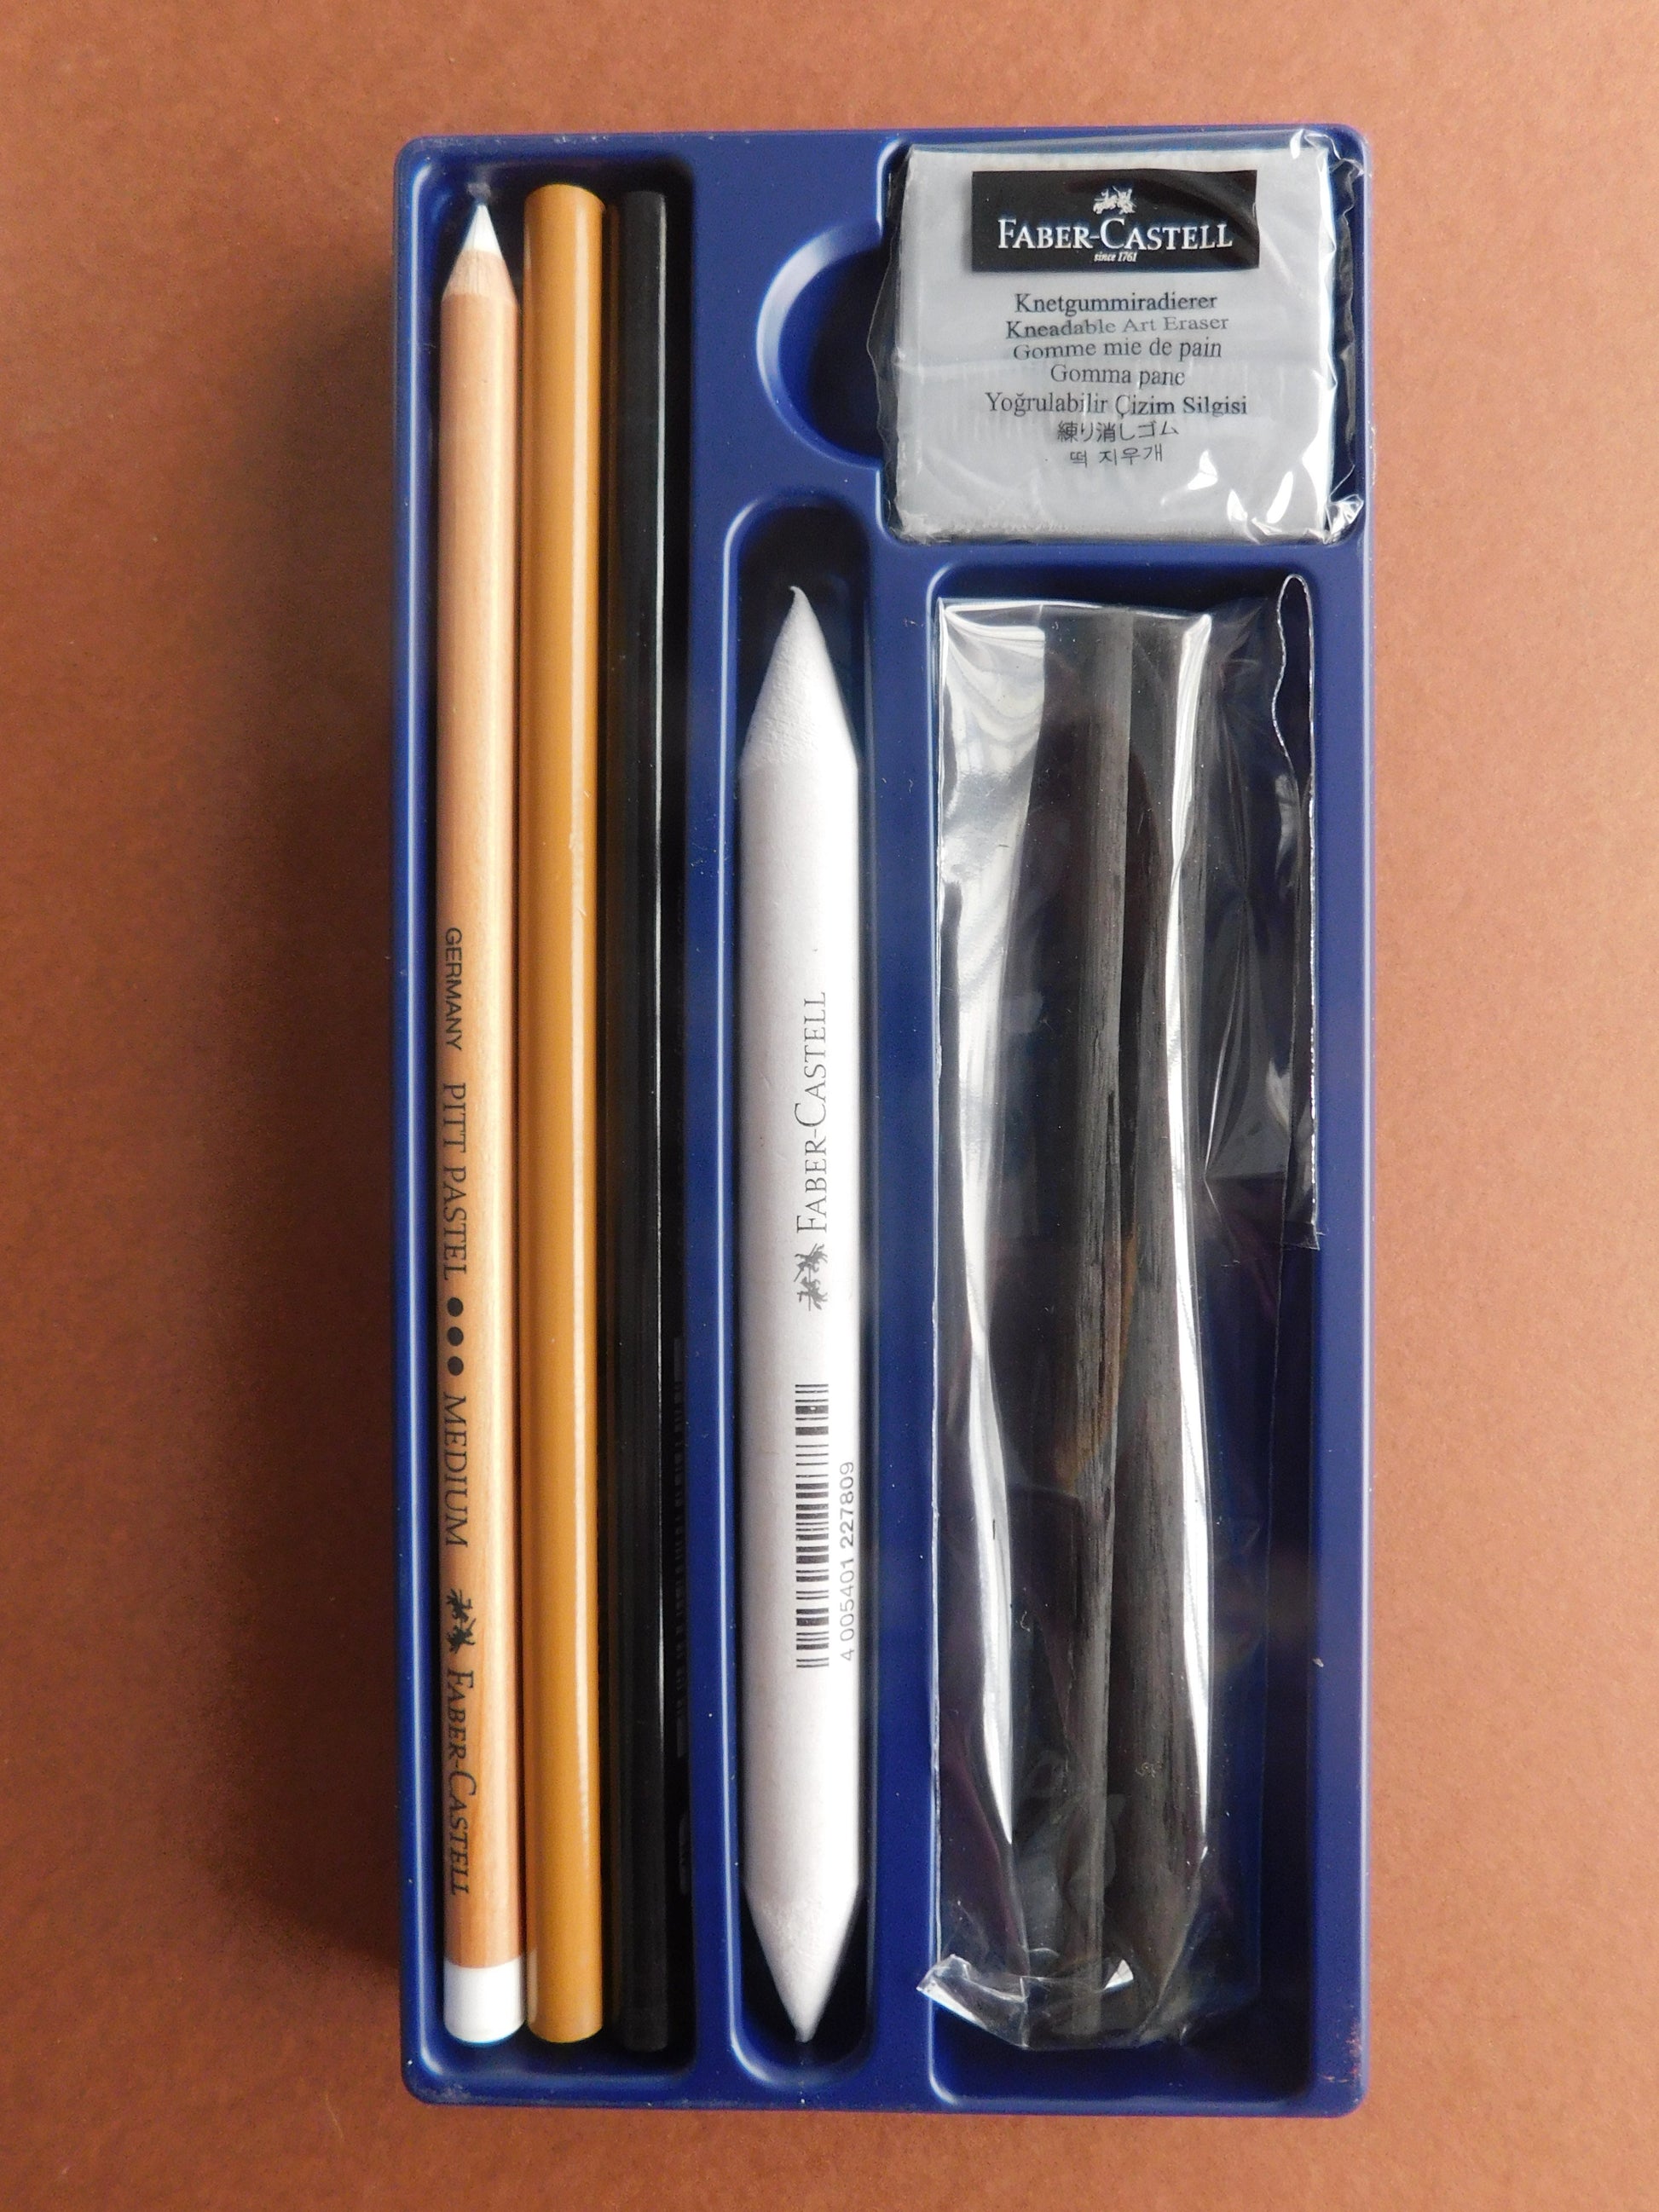 Faber-Castell Charcoal Sketch Set — Two Hands Paperie